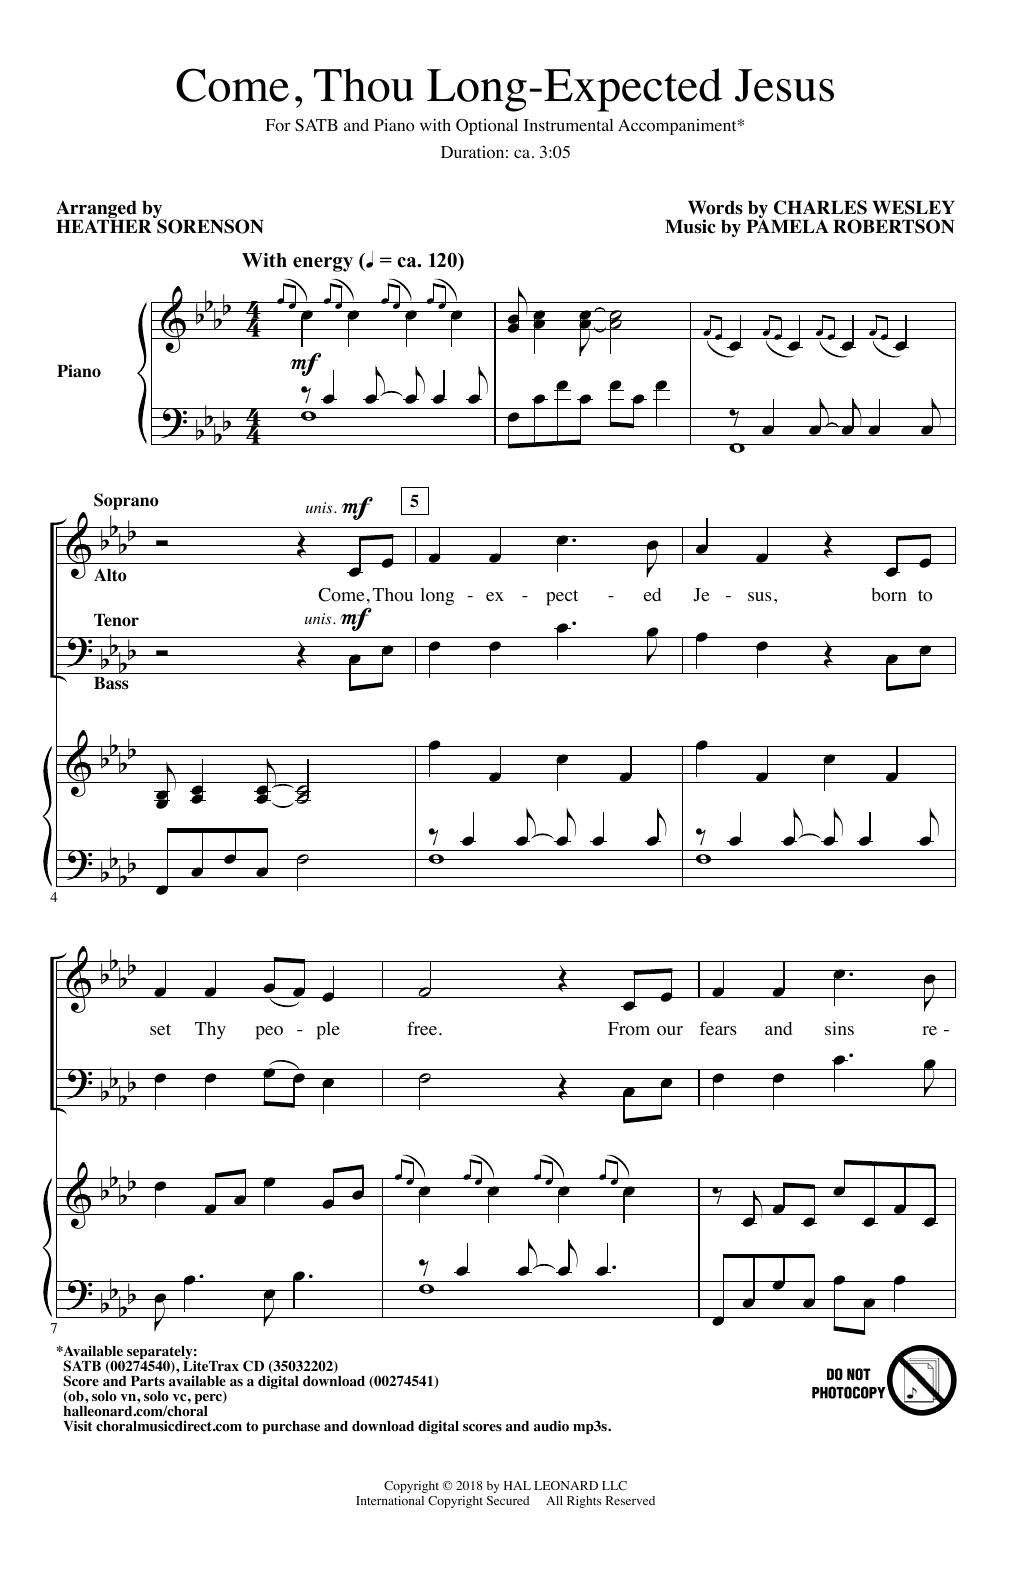 Download Heather Sorenson Come, Thou Long-Expected Jesus Sheet Music